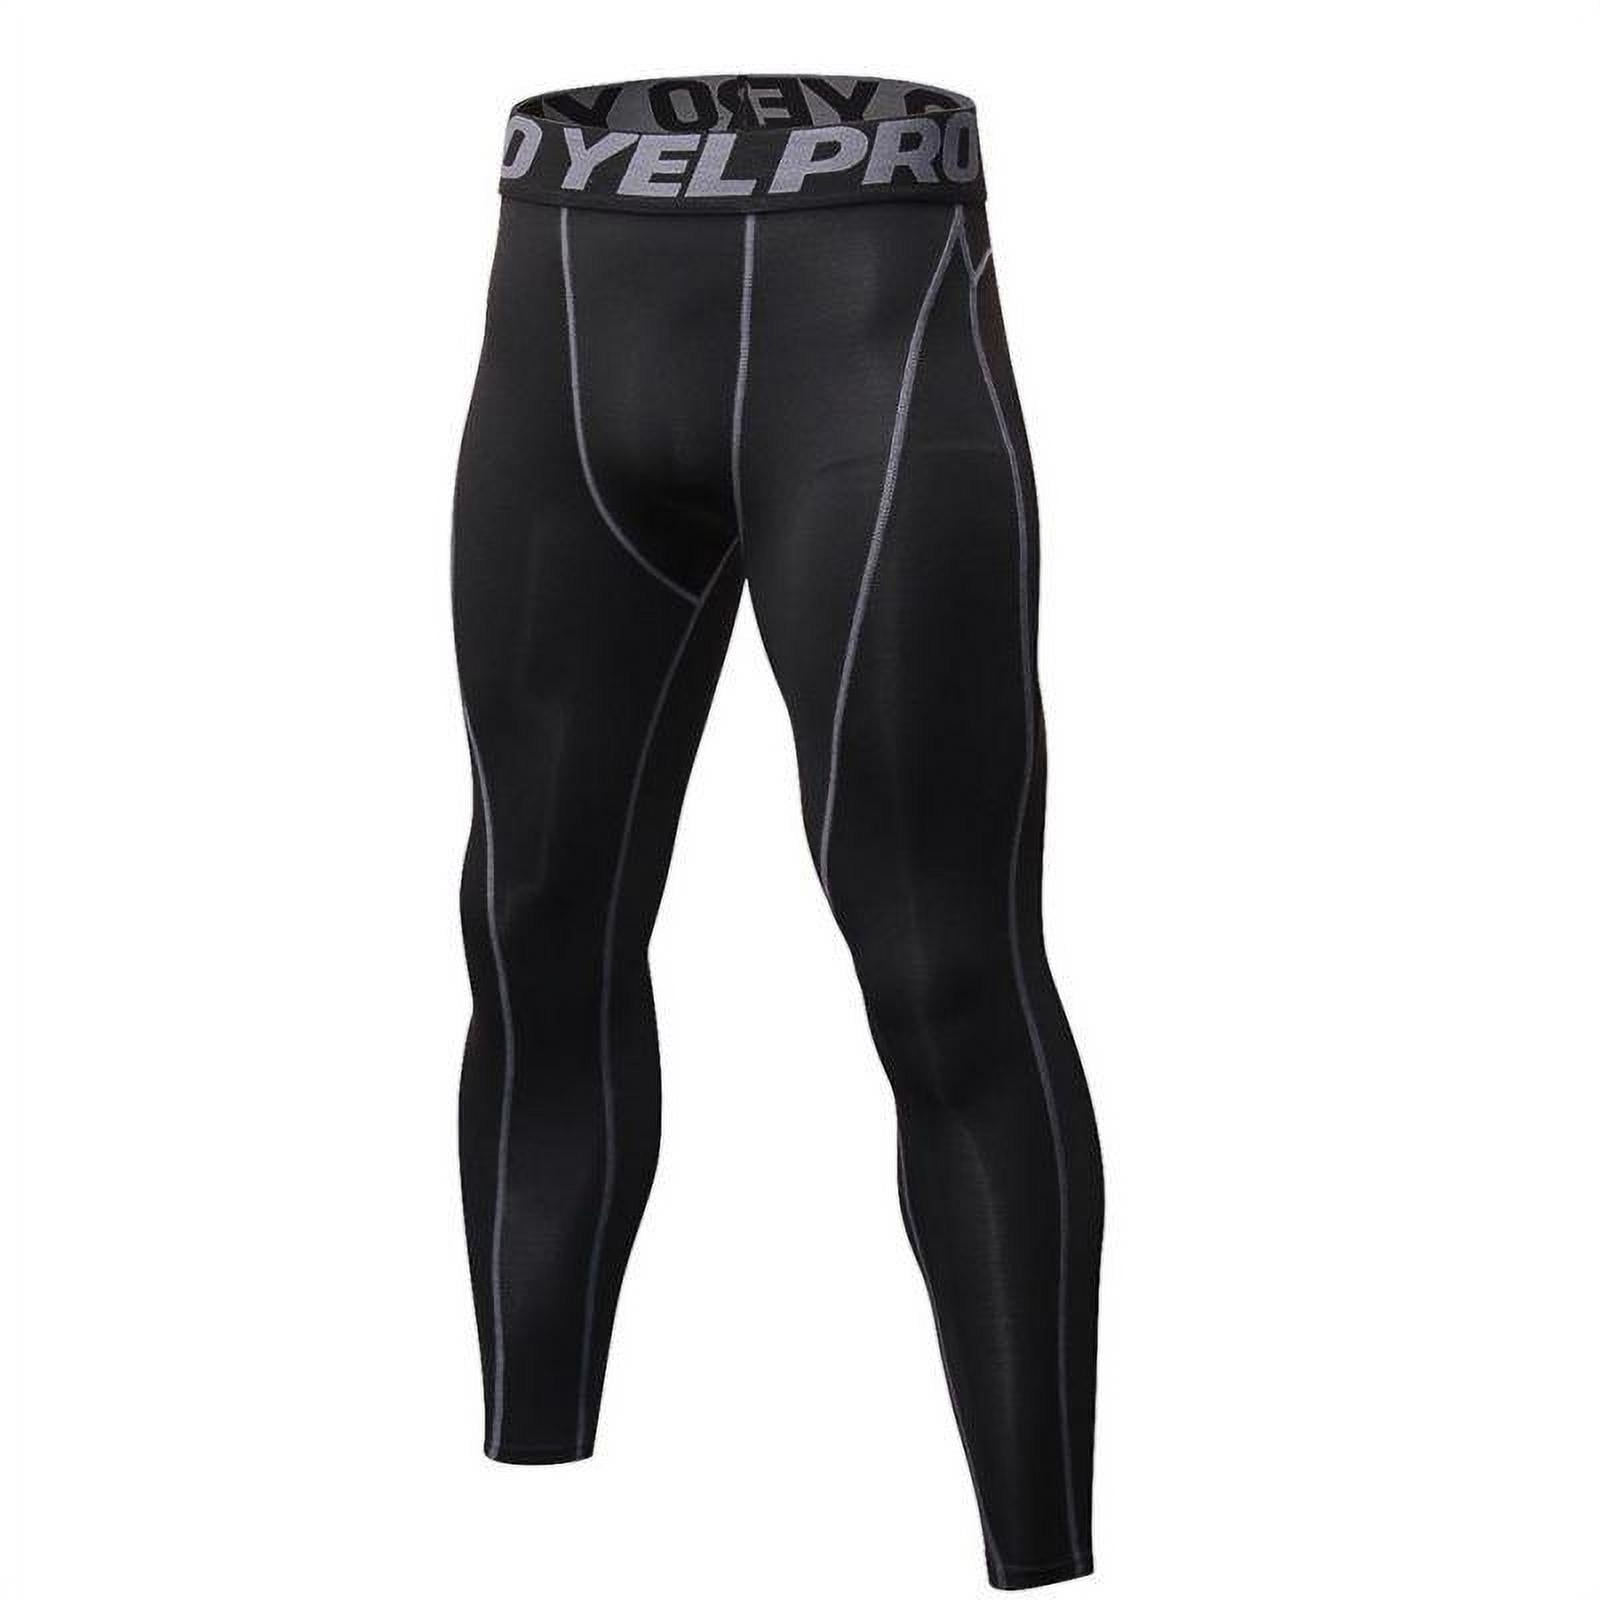 Athletics Professional Thermal Clothing for Sports Activities for Men and Women Shorts Tights